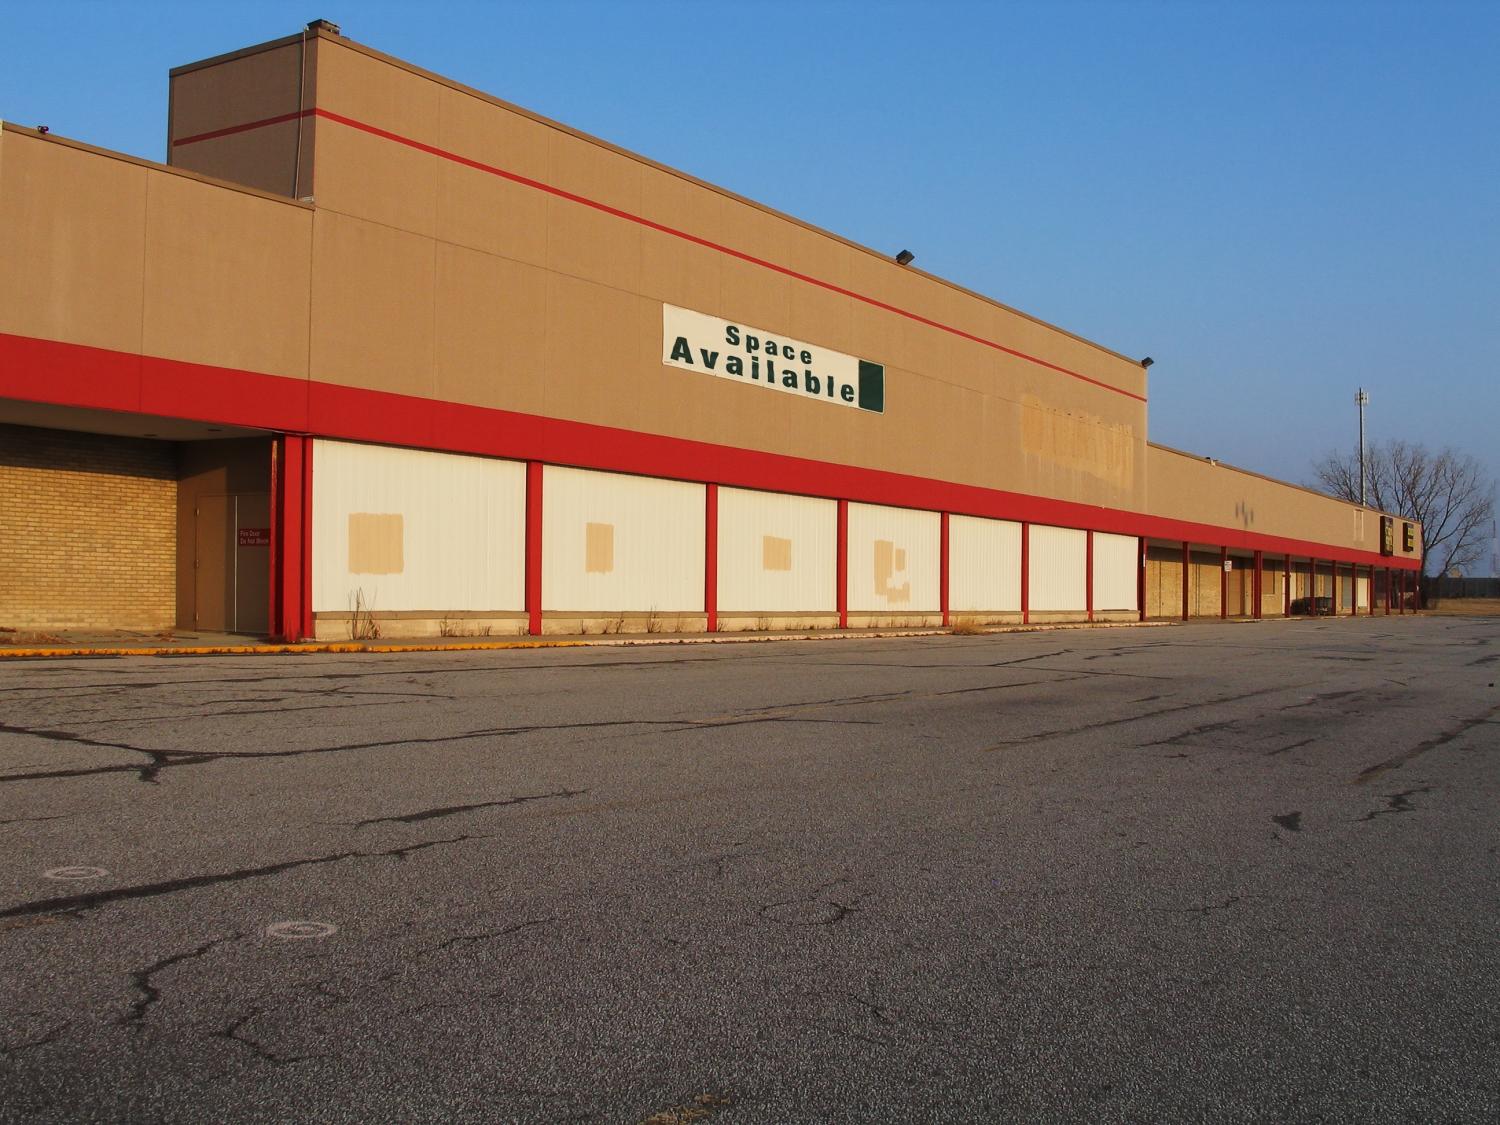 "Vacant commercial property available for lease. A victim of tough economic times or an opportunity to expand and growIf you find that this image suits your needs, I would appreciate knowing how it was used."